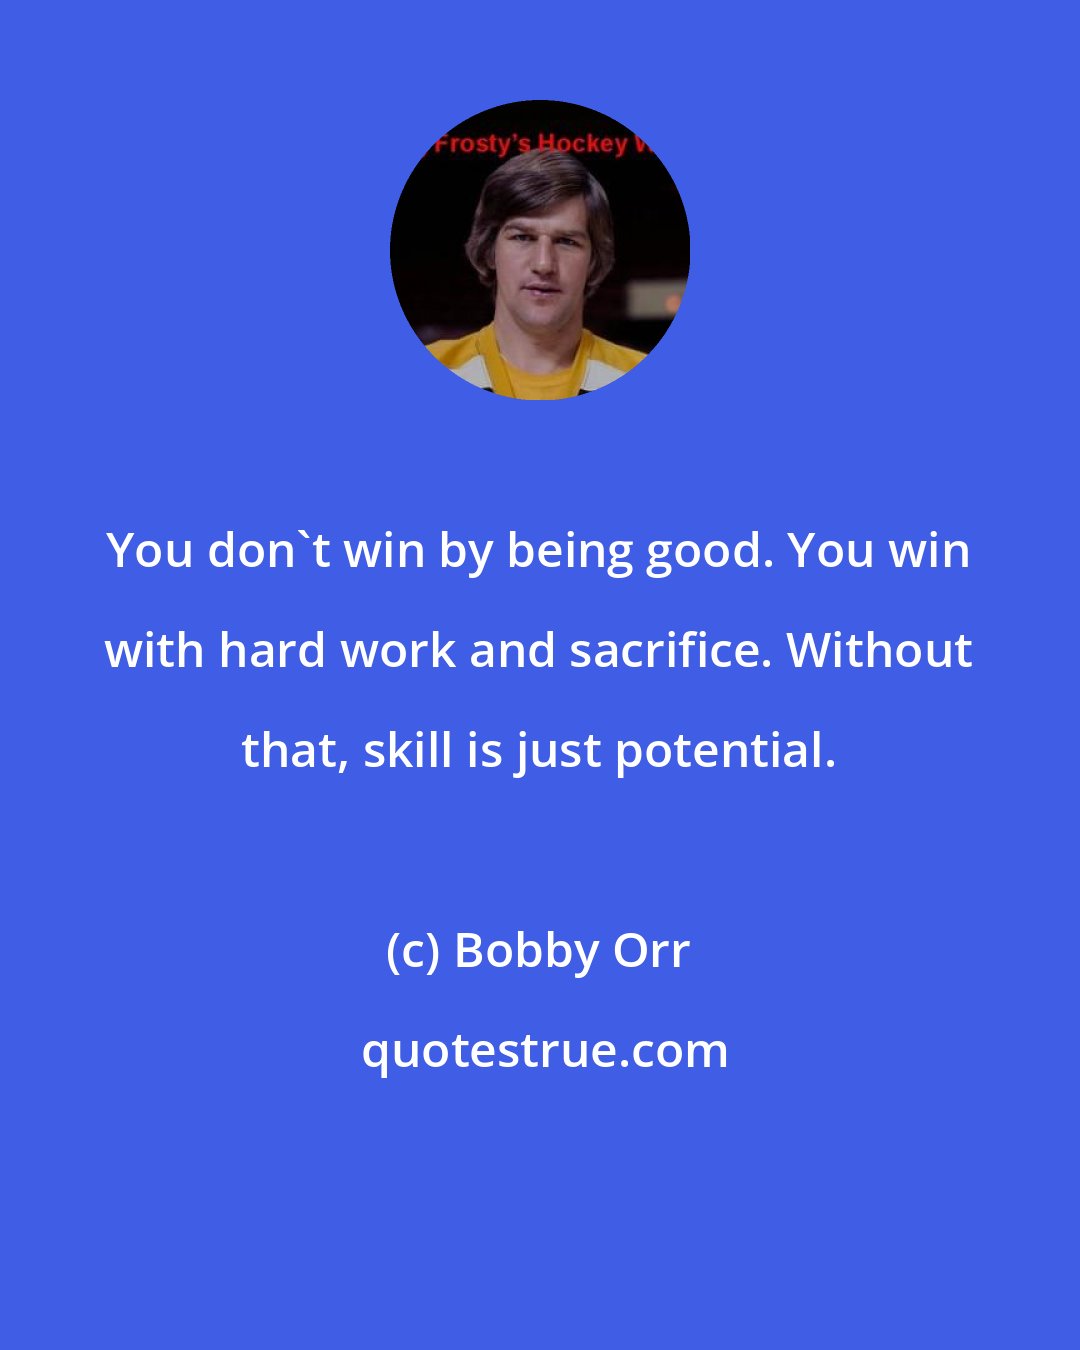 Bobby Orr: You don't win by being good. You win with hard work and sacrifice. Without that, skill is just potential.